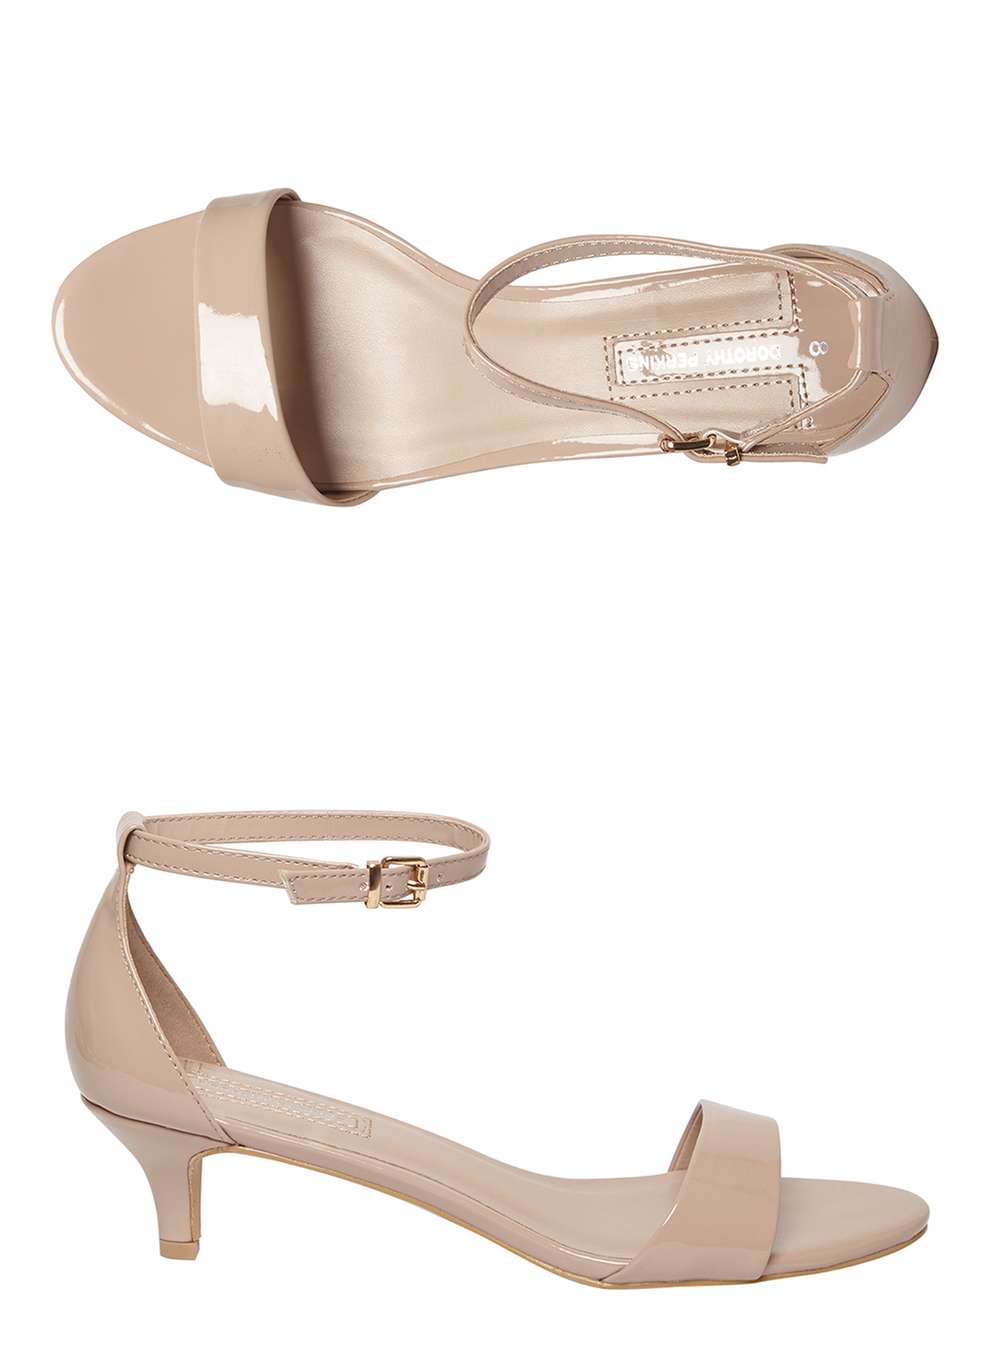 nude strappy sandals low heel